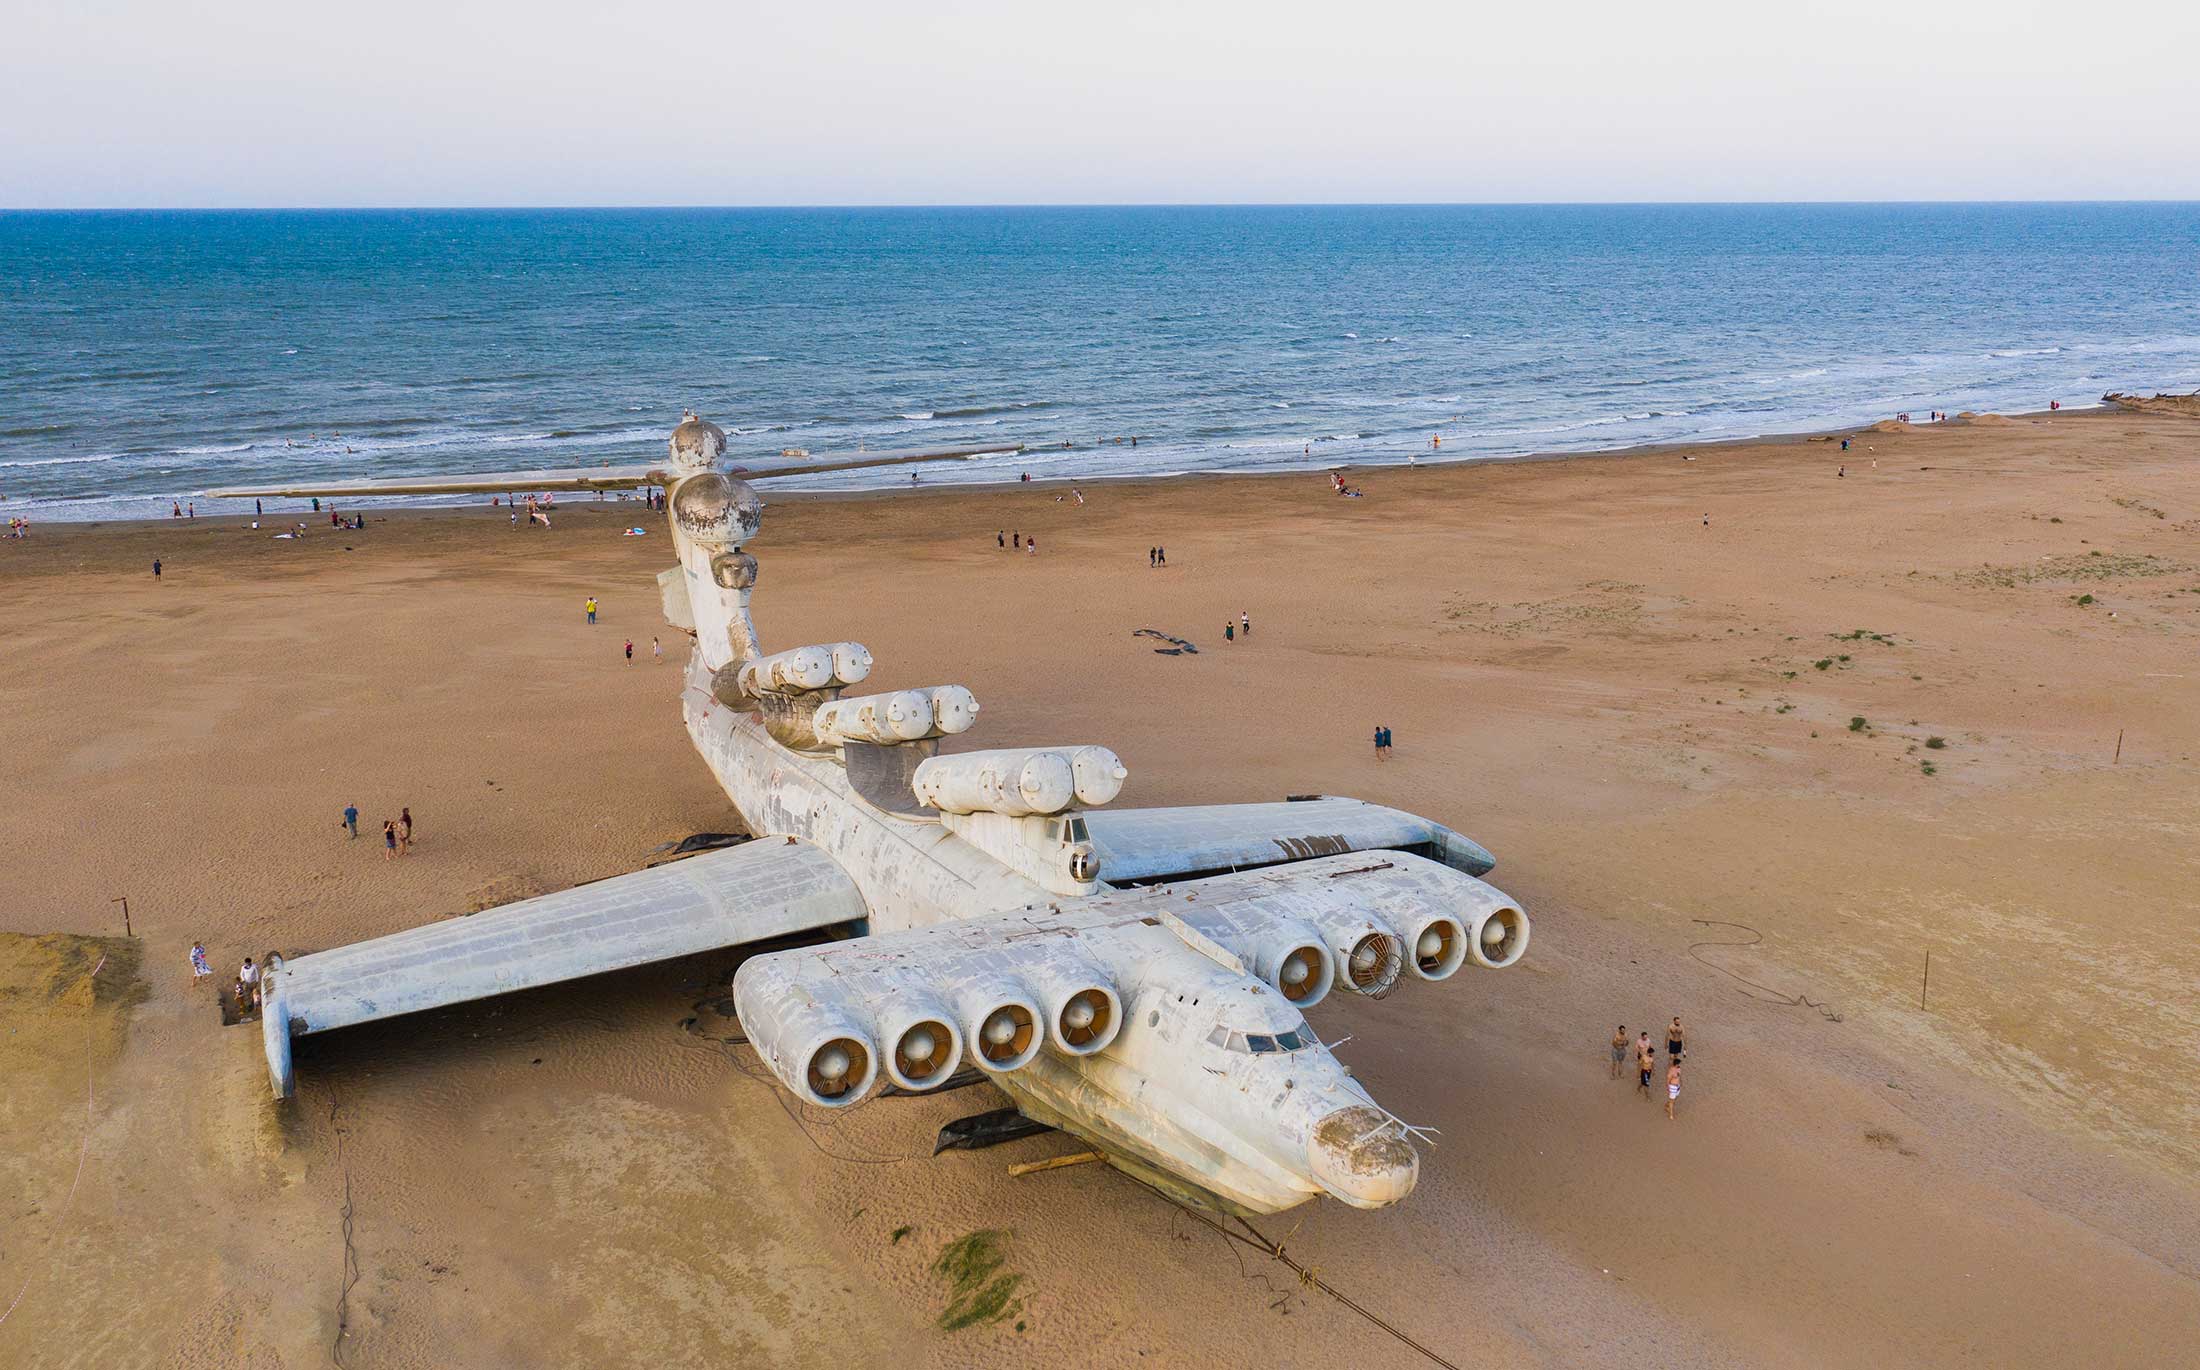 An ekranoplan on the shore of the Caspian Sea in 2022.